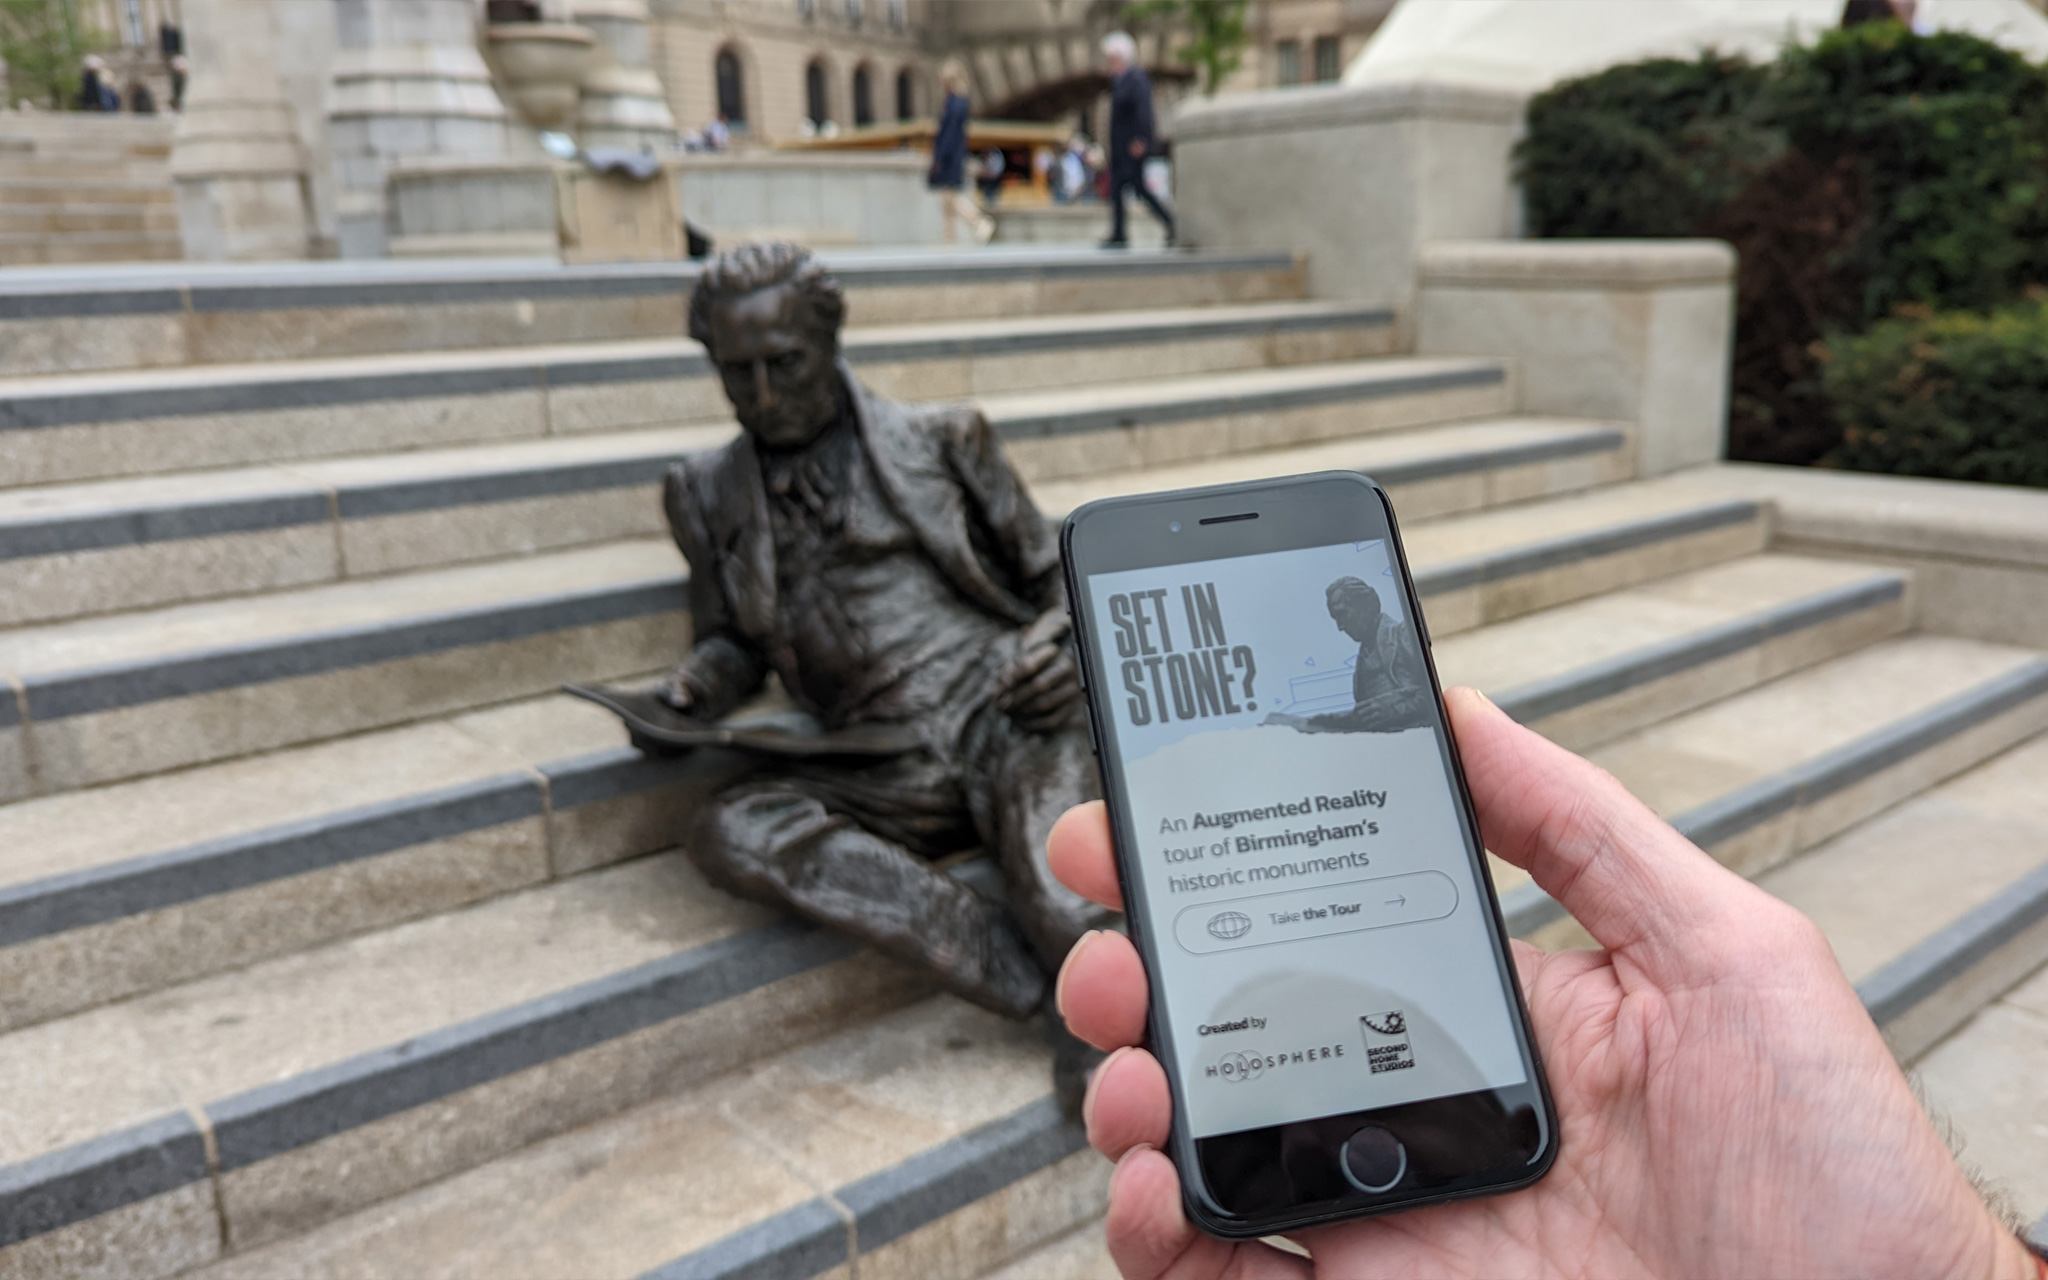 Someone using a mobile phone with augmented reality to find out more about the statues in Chamberlain Square, Paradise.